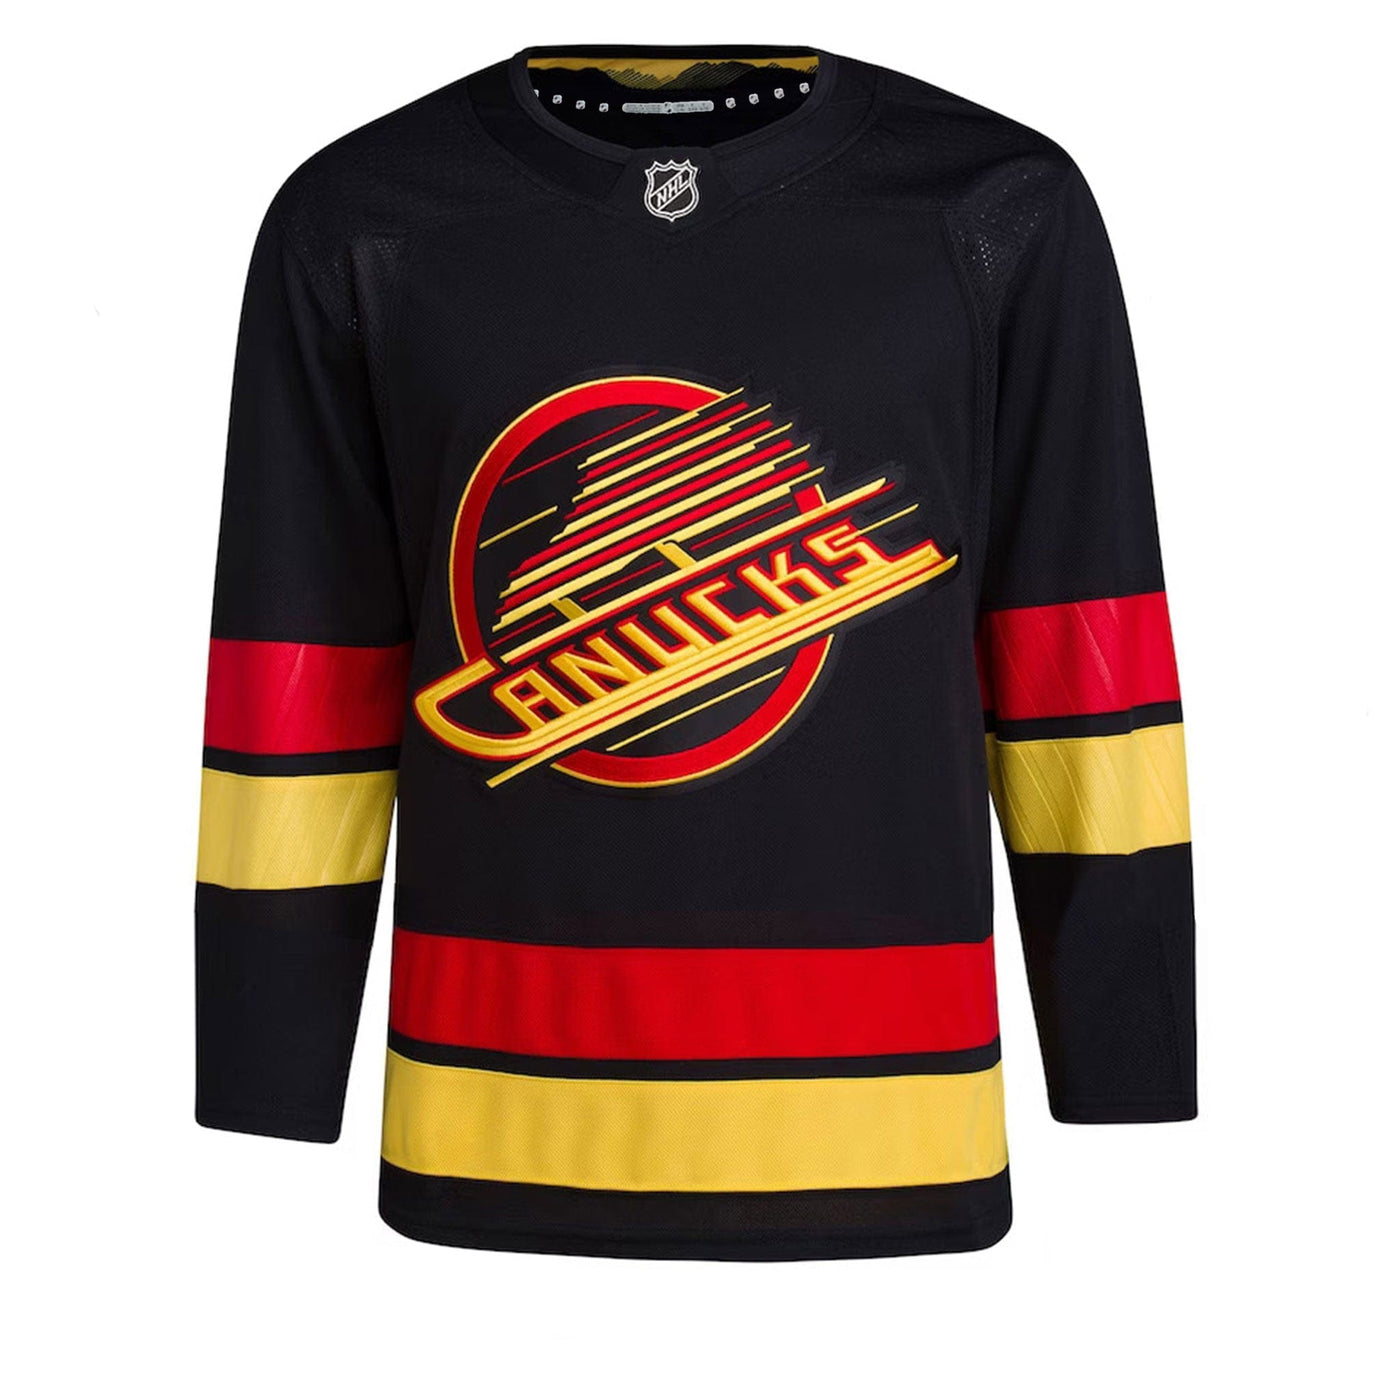 Vancouver Canucks Third Skate - OuterStuff Premier Junior Jersey - The Hockey Shop Source For Sports